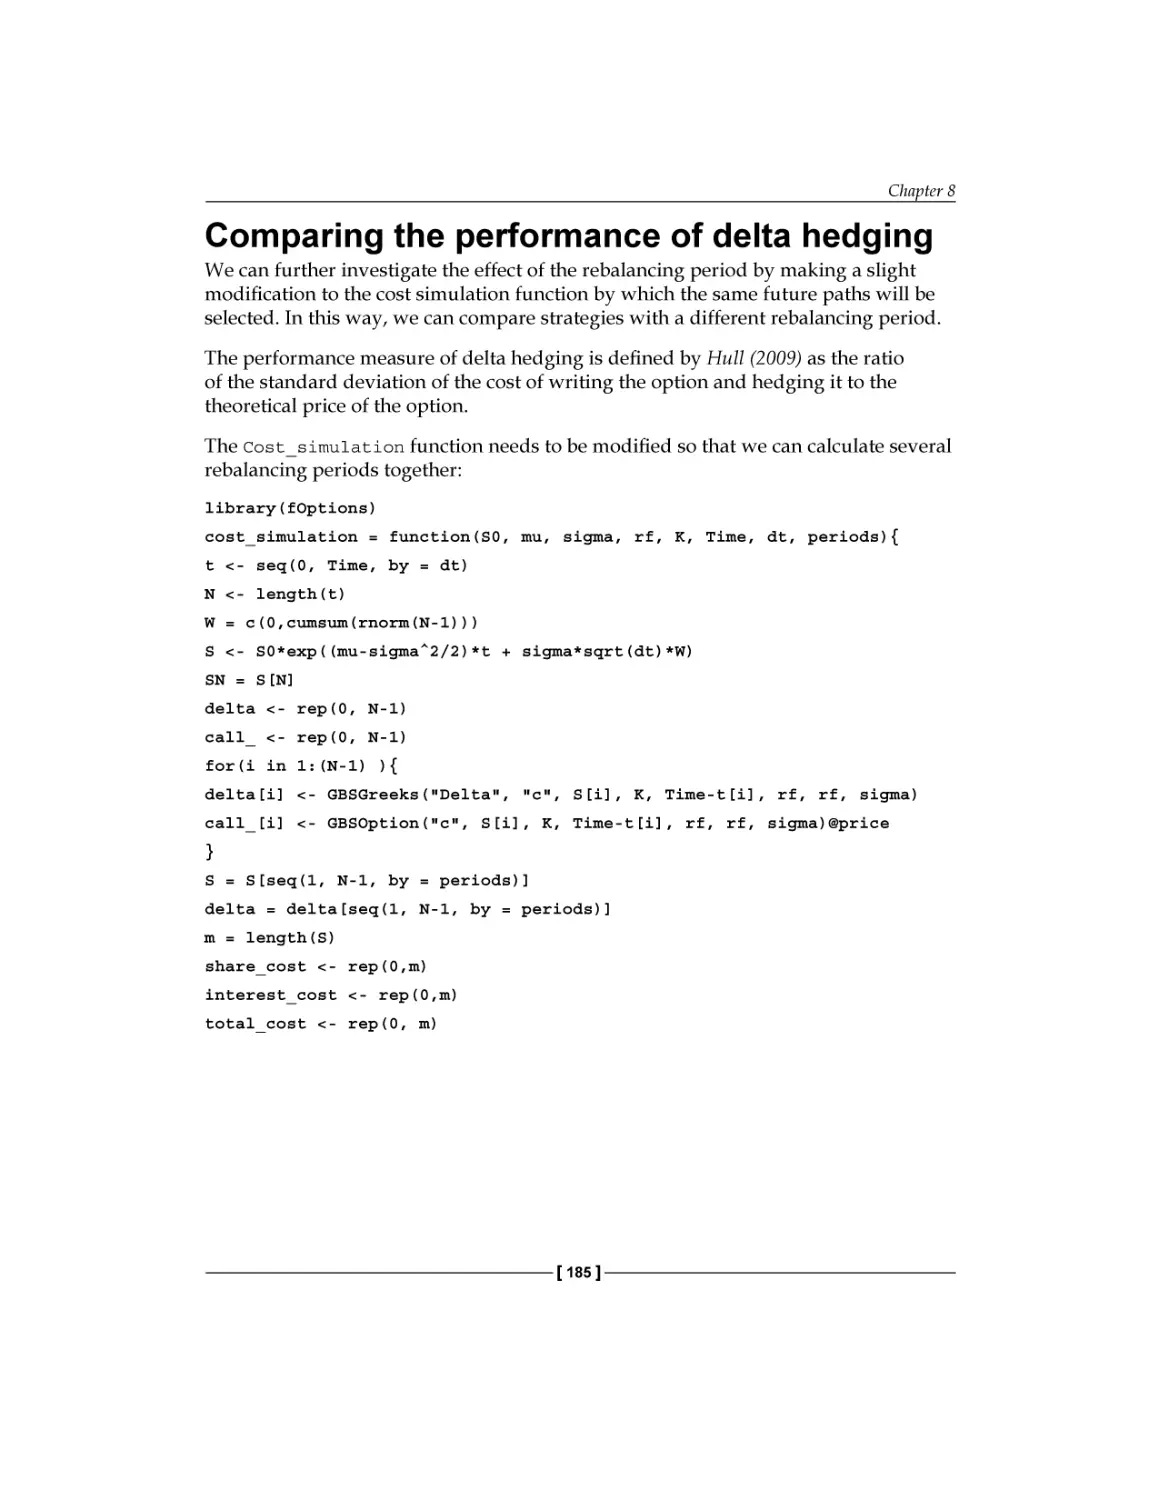 Comparing the performance of delta hedging